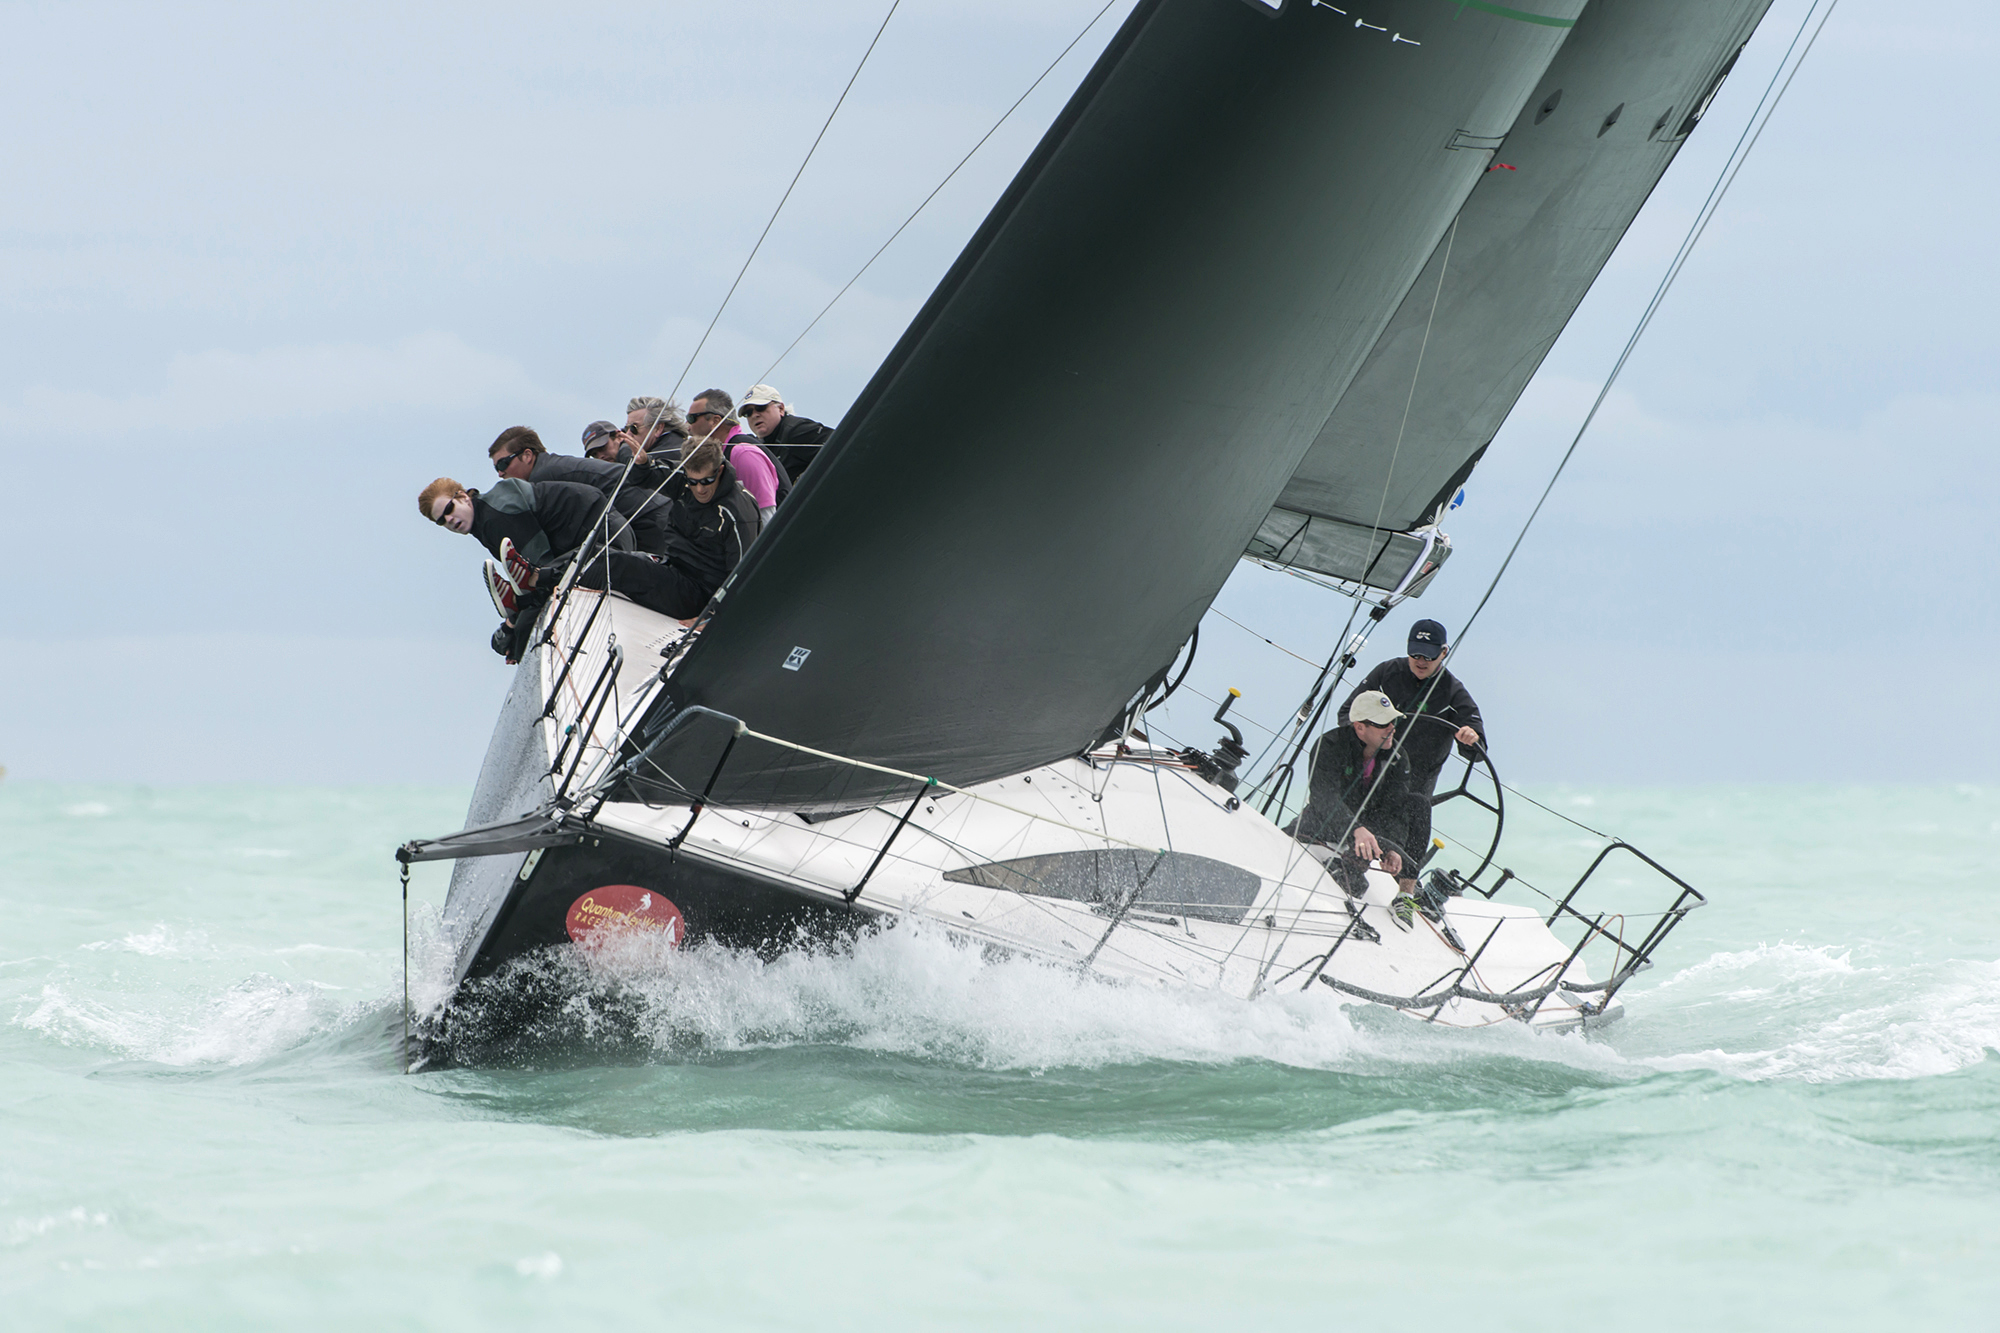 The Sydney 43 CHRISTOPHER DRAGON won her division at Key West Race Week 2016 with eight firsts and a second sailing with a full inventory of Uni-Titanium upwind sails.